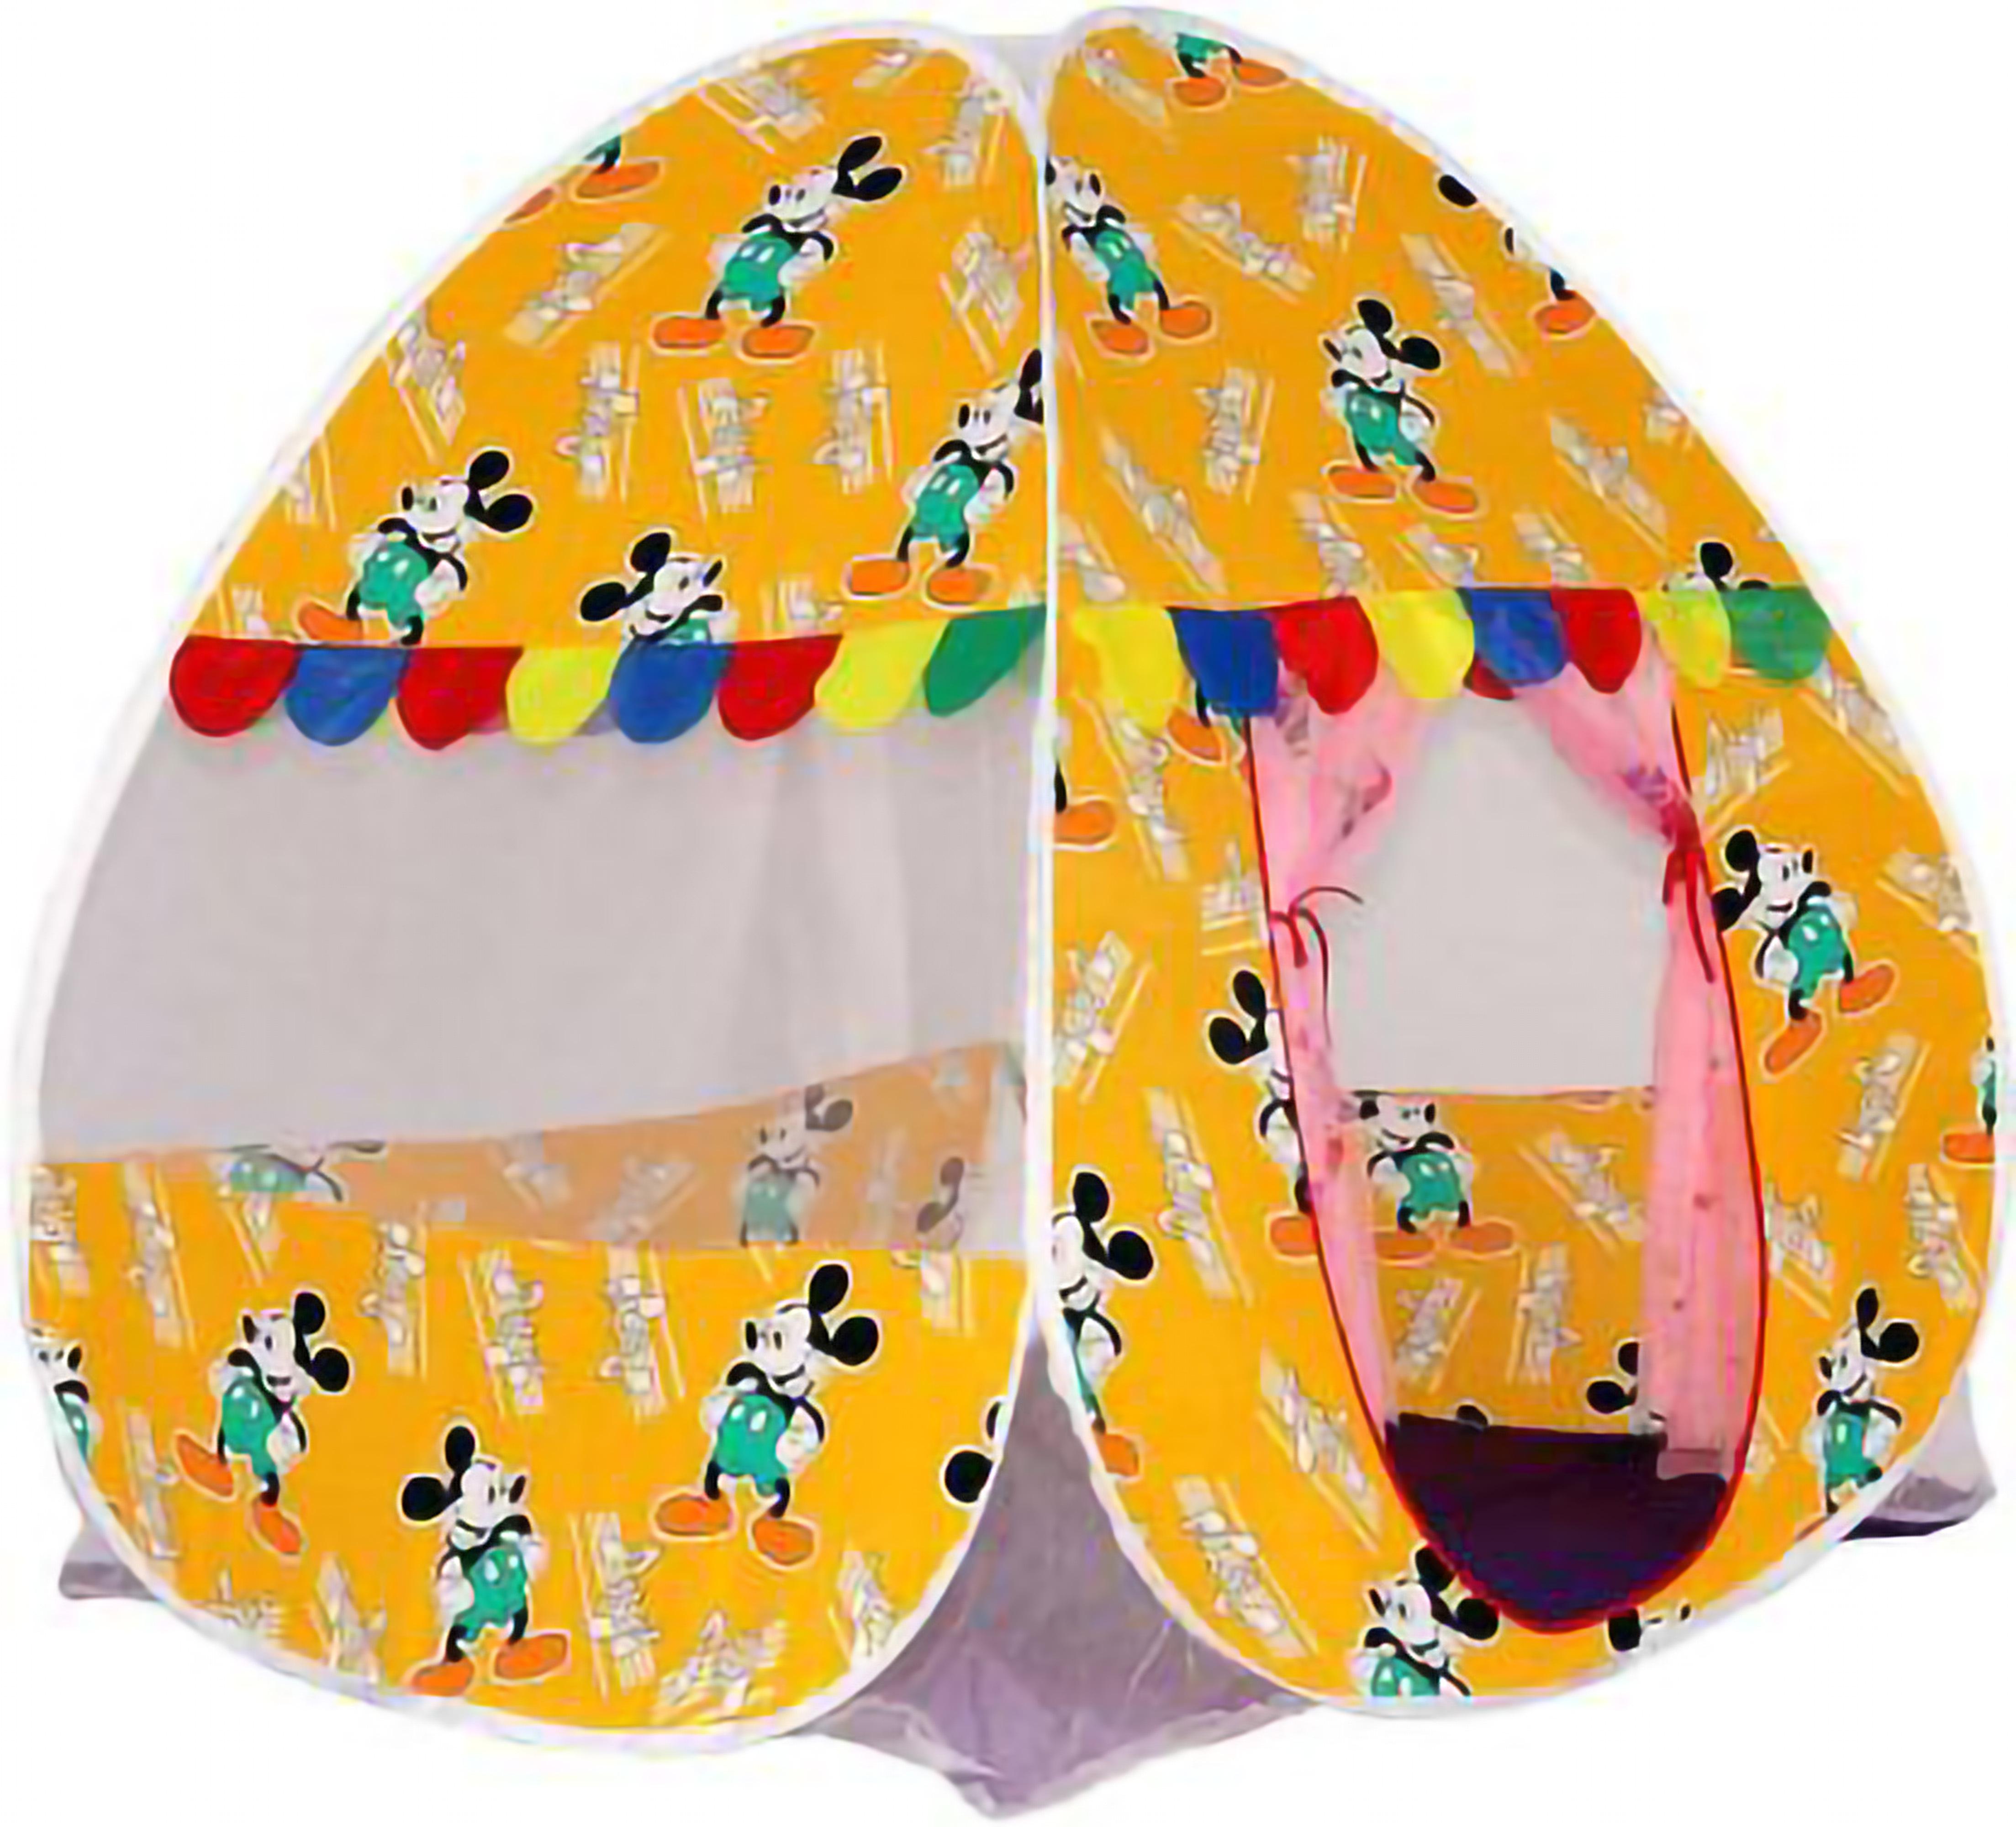 110 X 110 X 120 Cm Multi Color,Easy To Assemble,900grams Details about   Kids Play Tent House